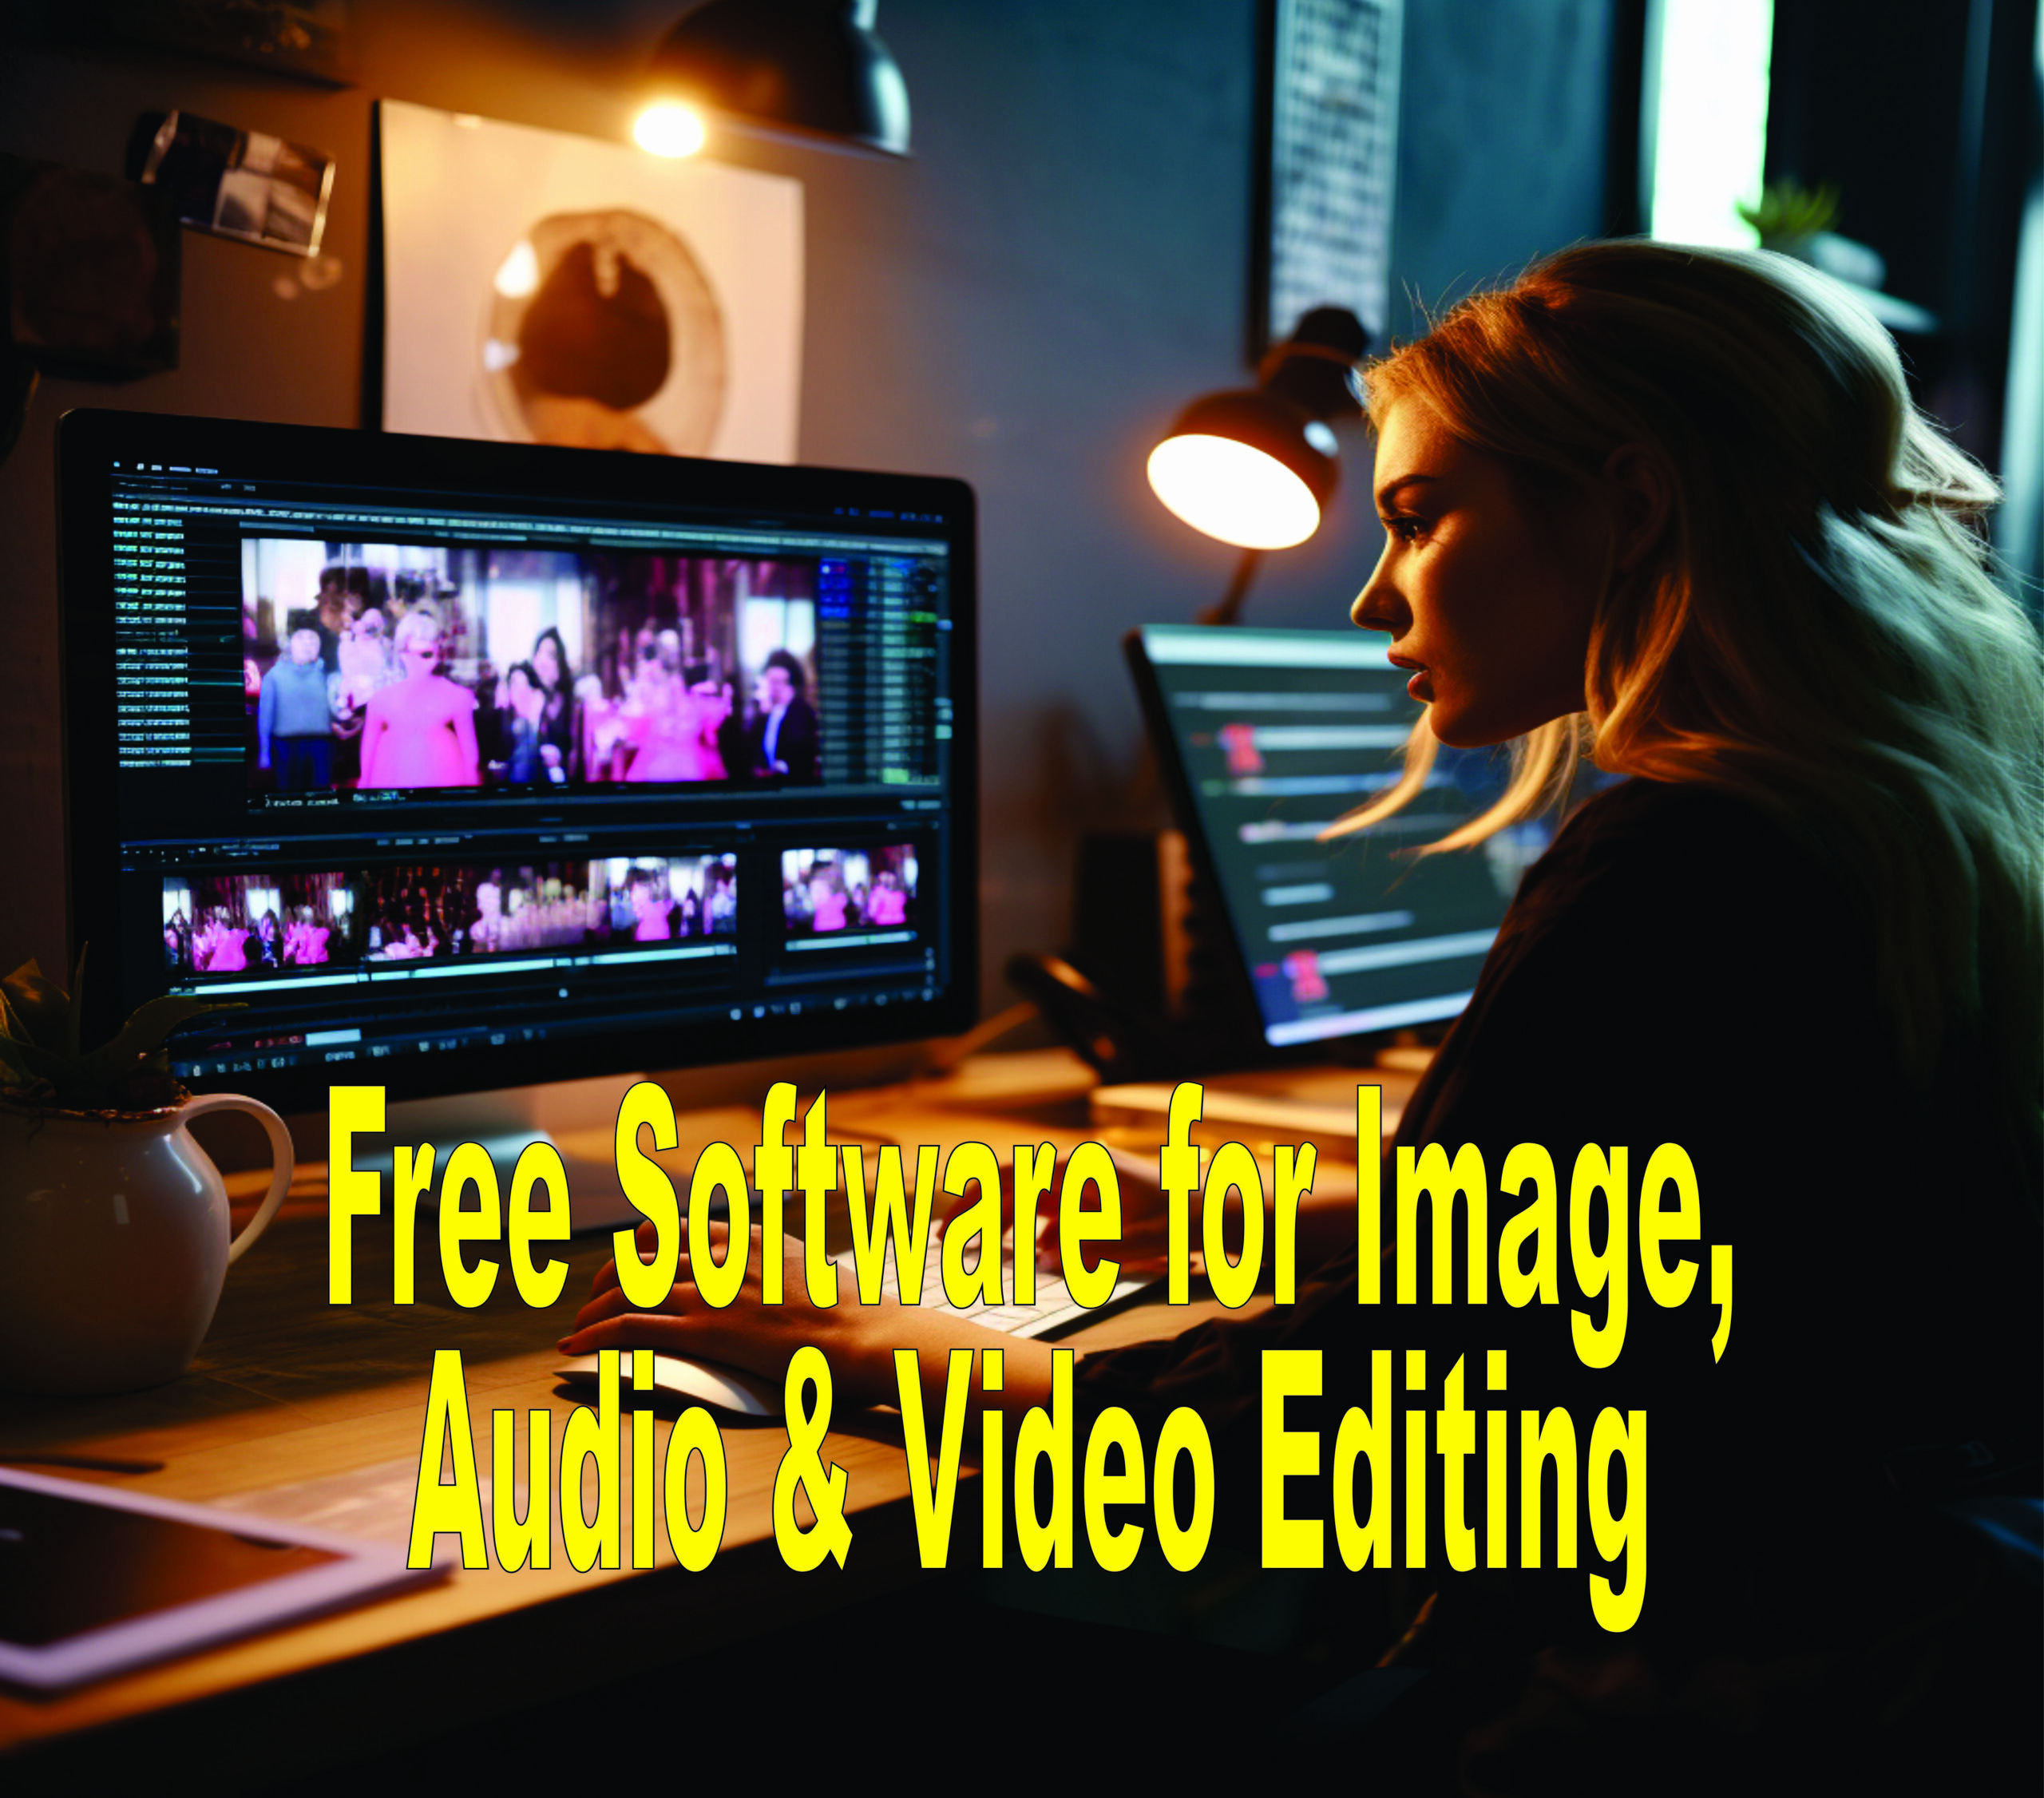 Free Software For Image, Audio & Video Editing